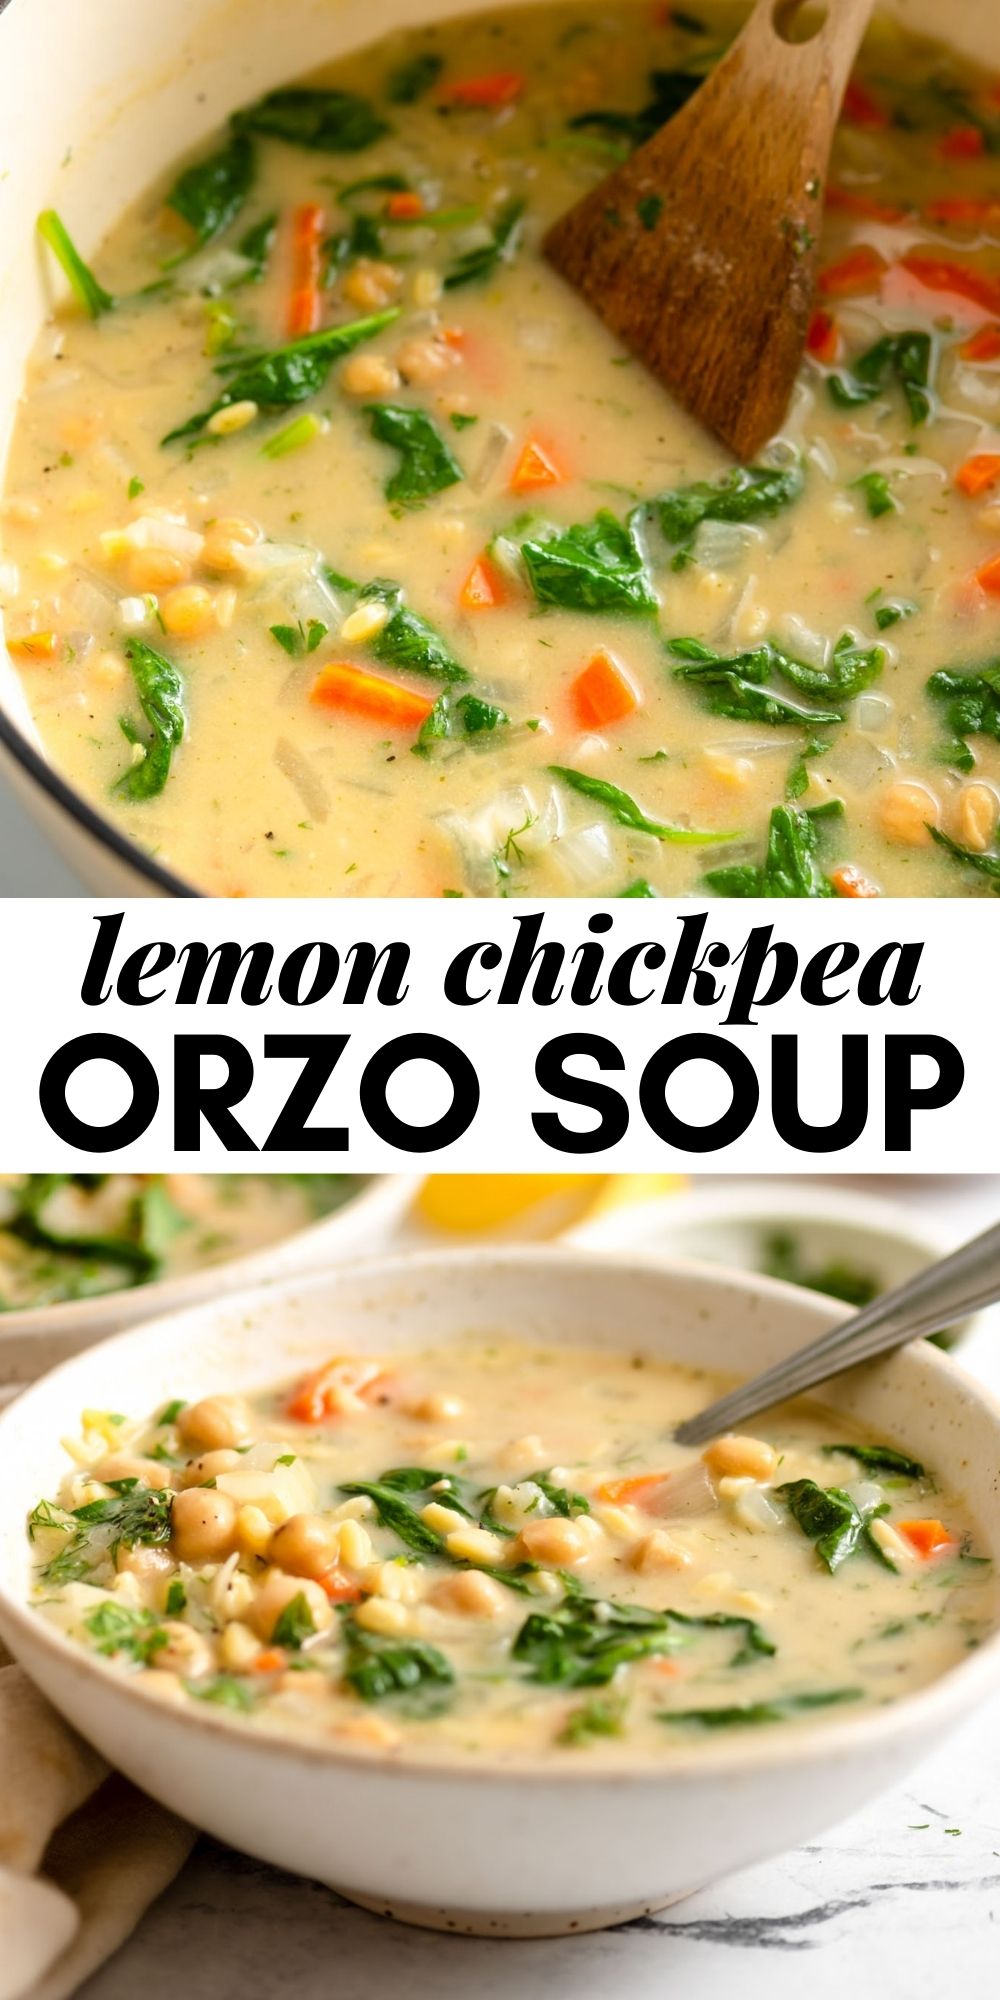 Pinterest graphic with an image and text for vegan lemon chickpea orzo soup.